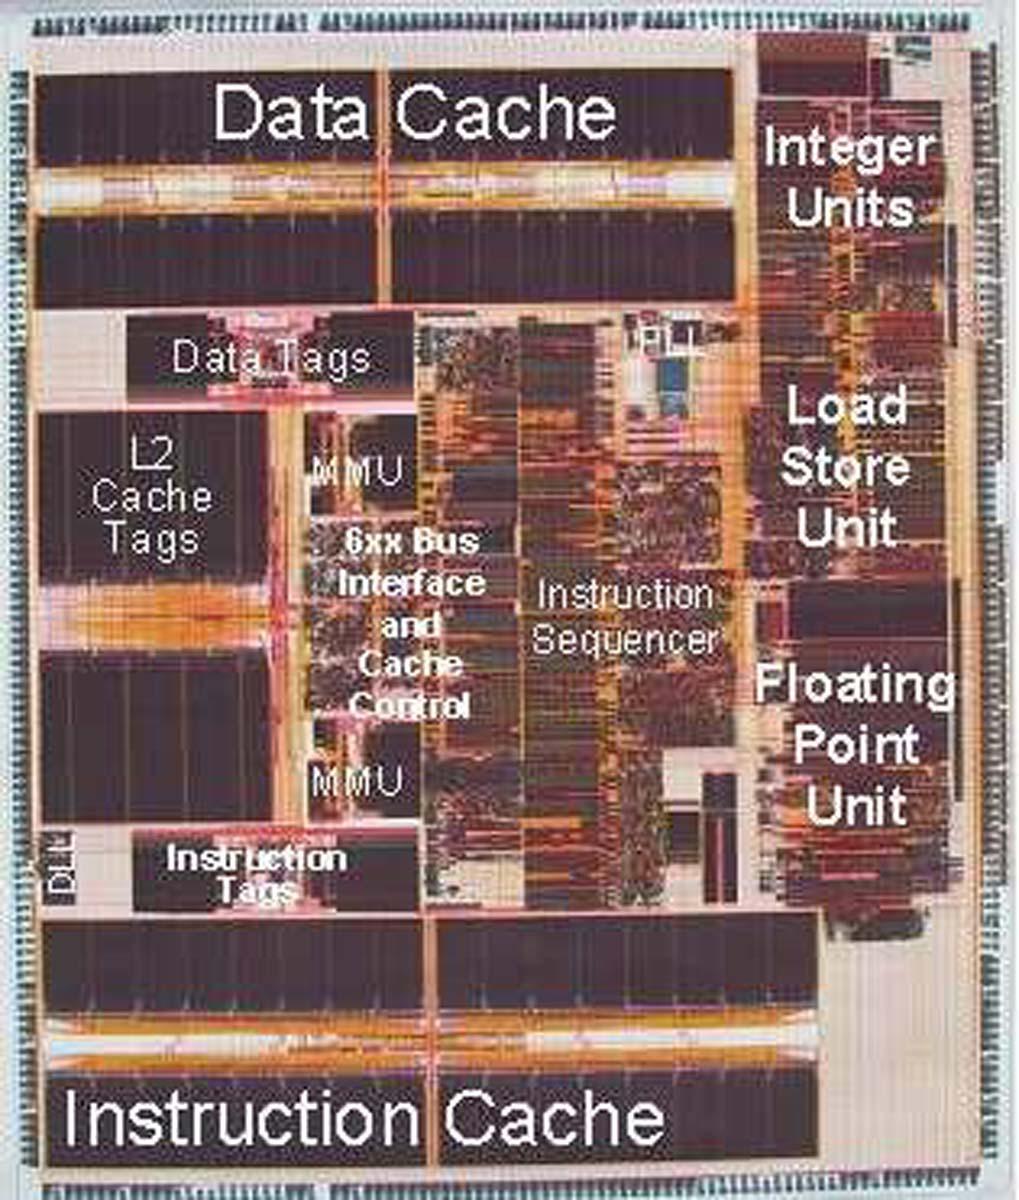 An actual CPU Early PowerPC Cache 32 KByte Instructions and 32 KByte Data L1 caches External L2 Cache interface with integrated controller and cache tags, supports up to 1 MByte external L2 cache